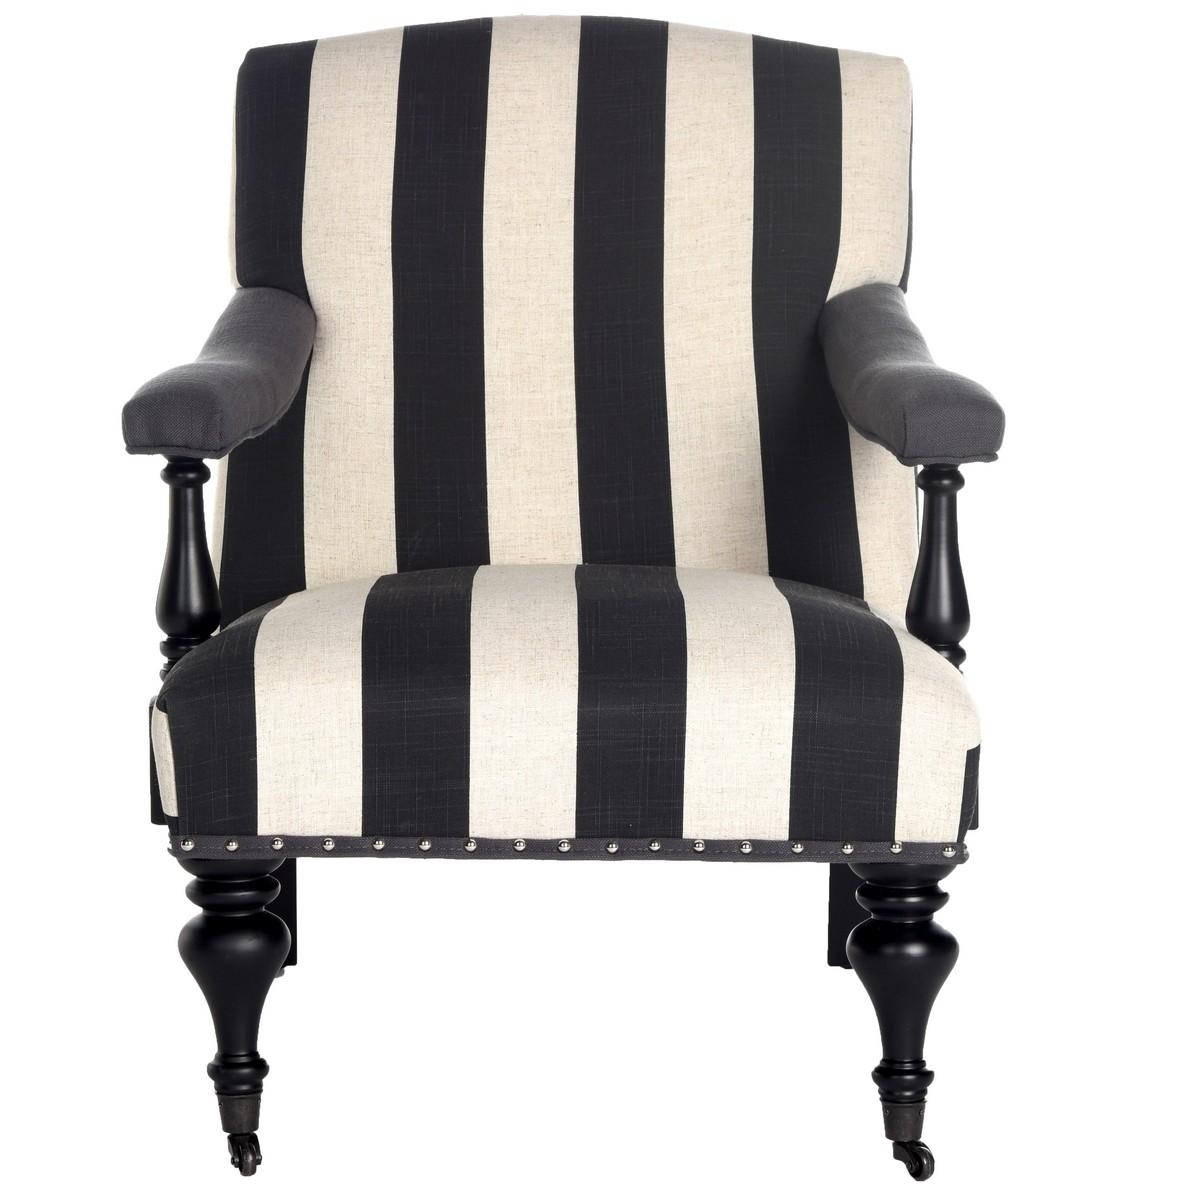 Devona Awning Stripe Arm Chair - Silver Nail Heads - Charcoal/White - Arlo Home - Image 6